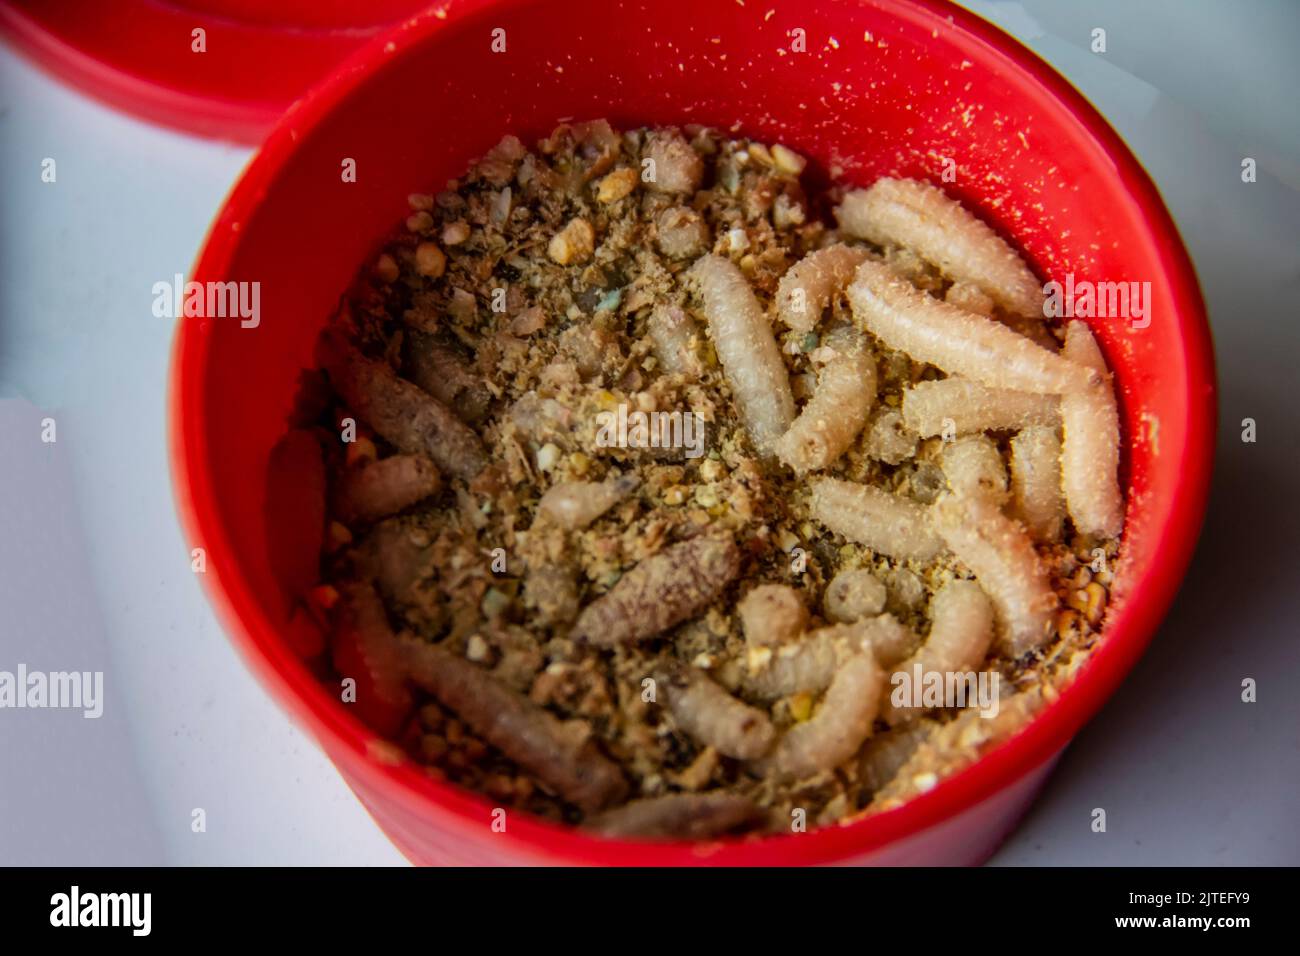 https://c8.alamy.com/comp/2JTEFY9/live-fly-larvae-in-the-red-plastic-plate-as-bait-for-catching-fish-the-maggots-for-fishing-against-background-2JTEFY9.jpg